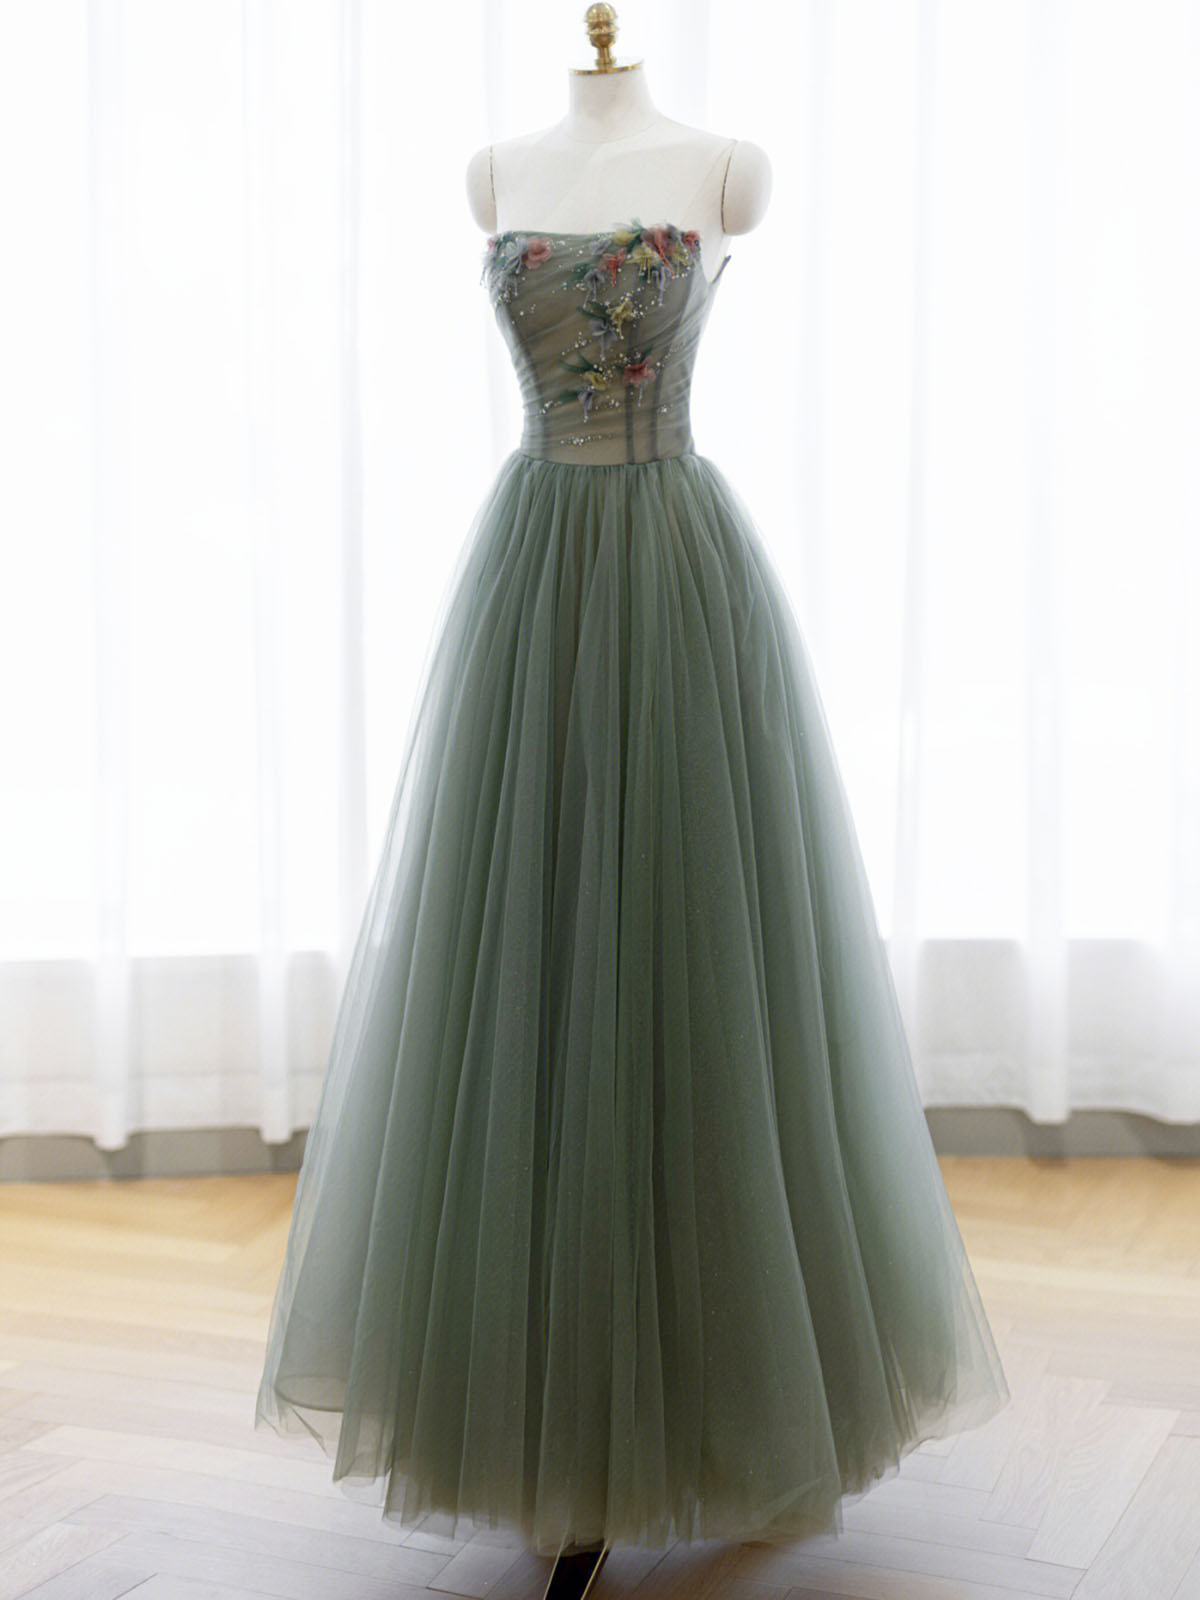 Prom Dresses Modest, A-Line Green Tulle Long Prom Dress, Off the Shoulder Evening Party Dress